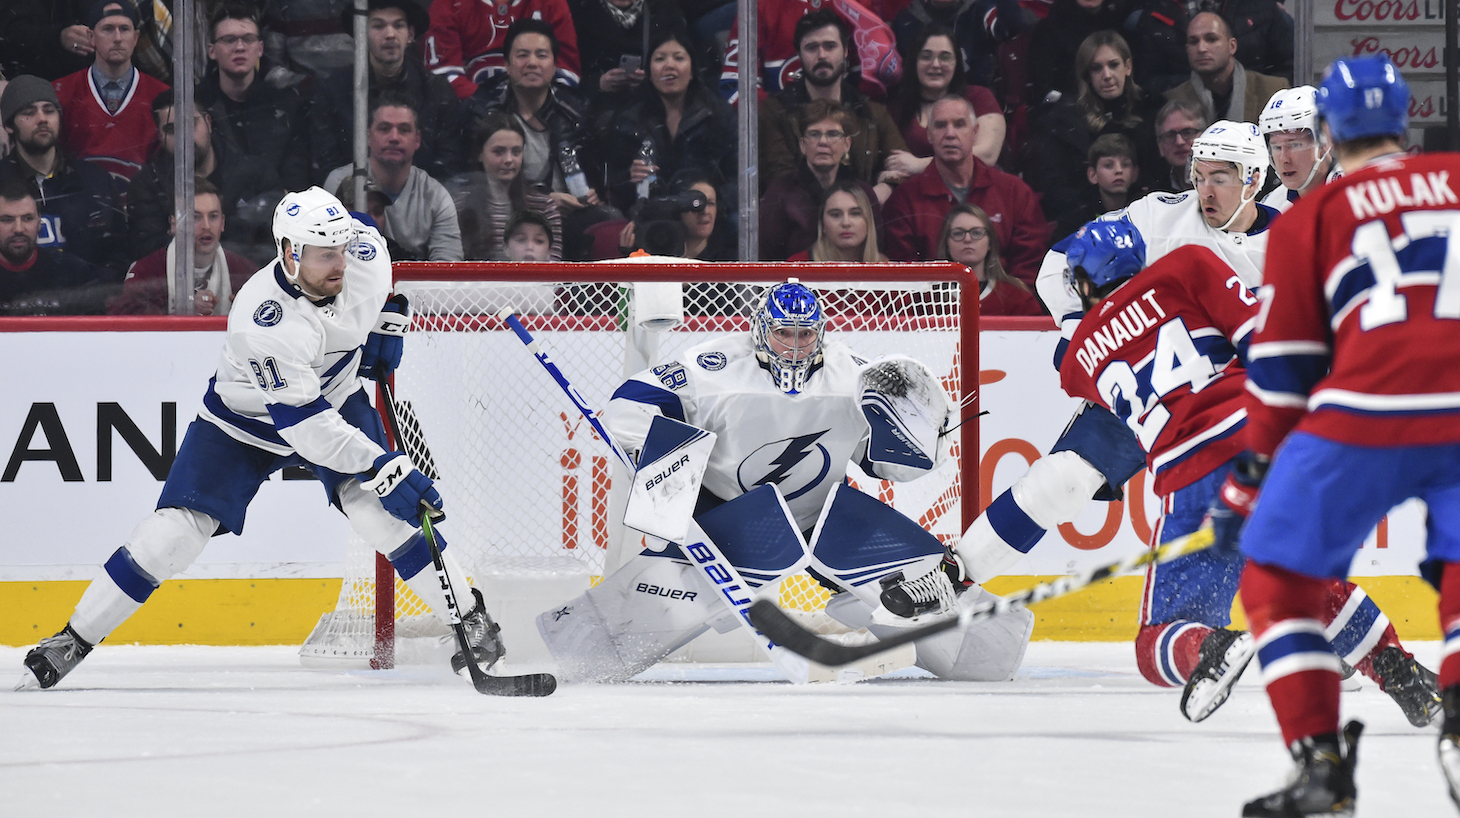 MONTREAL, QC - JANUARY 02: Goaltender Andrei Vasilevskiy #88 of the Tampa Bay Lightning watches the puck against the Montreal Canadiens during the third period at the Bell Centre on January 2, 2020 in Montreal, Canada. The Tampa Bay Lightning defeated the Montreal Canadiens 2-1. (Photo by Minas Panagiotakis/Getty Images)